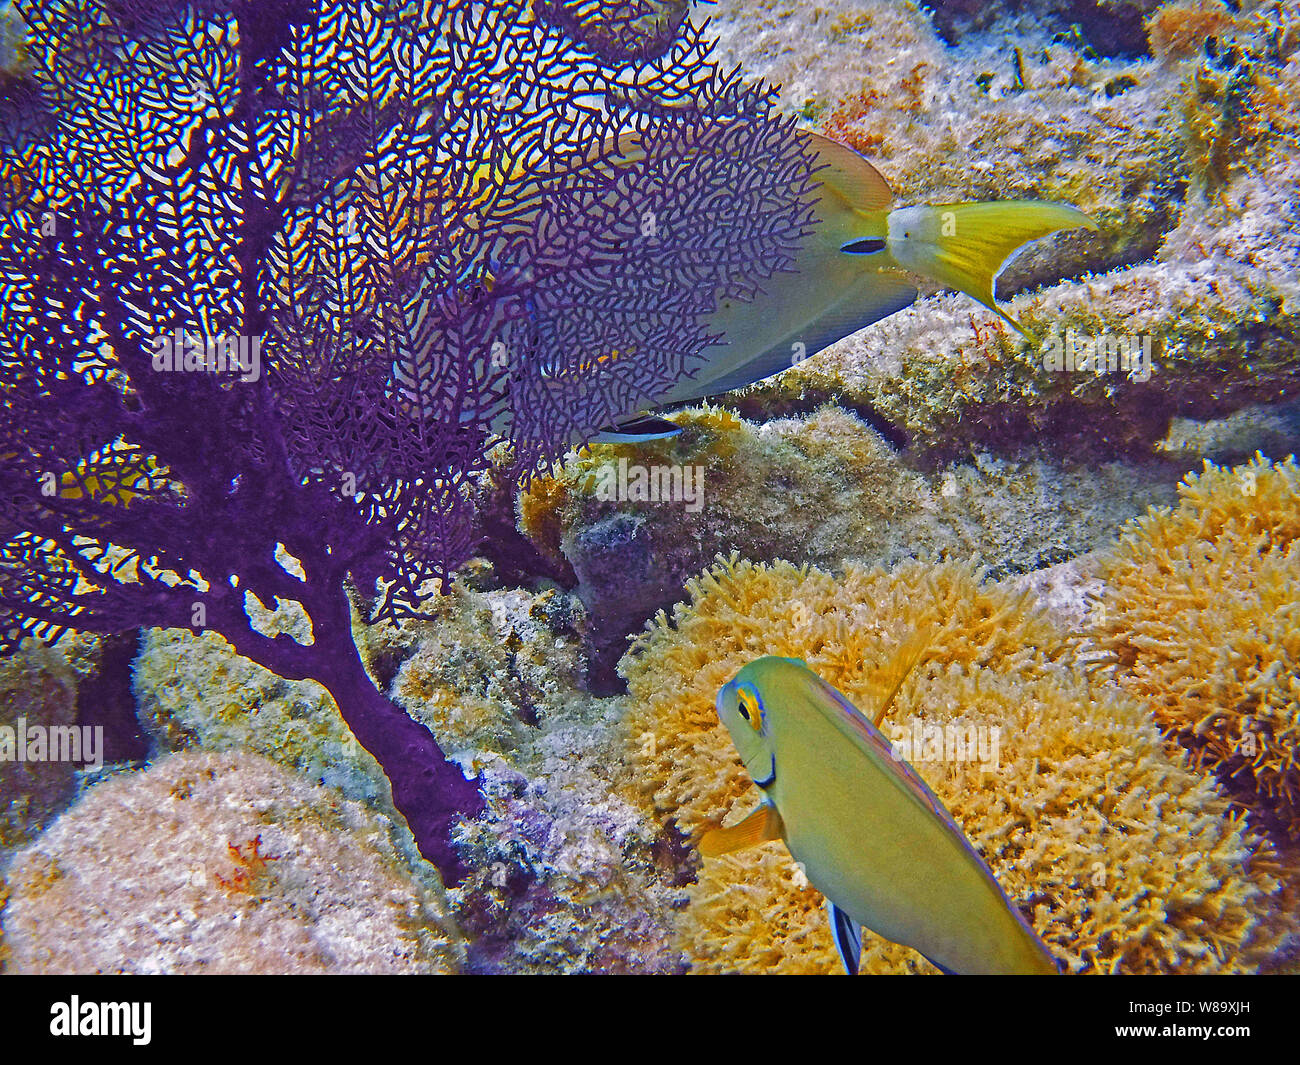 Two Doctorfish (Acanthurus chirurgus) swimming near a Purple Sea Fan off the Florida Keys. This taken on a shallow coral reef. Stock Photo